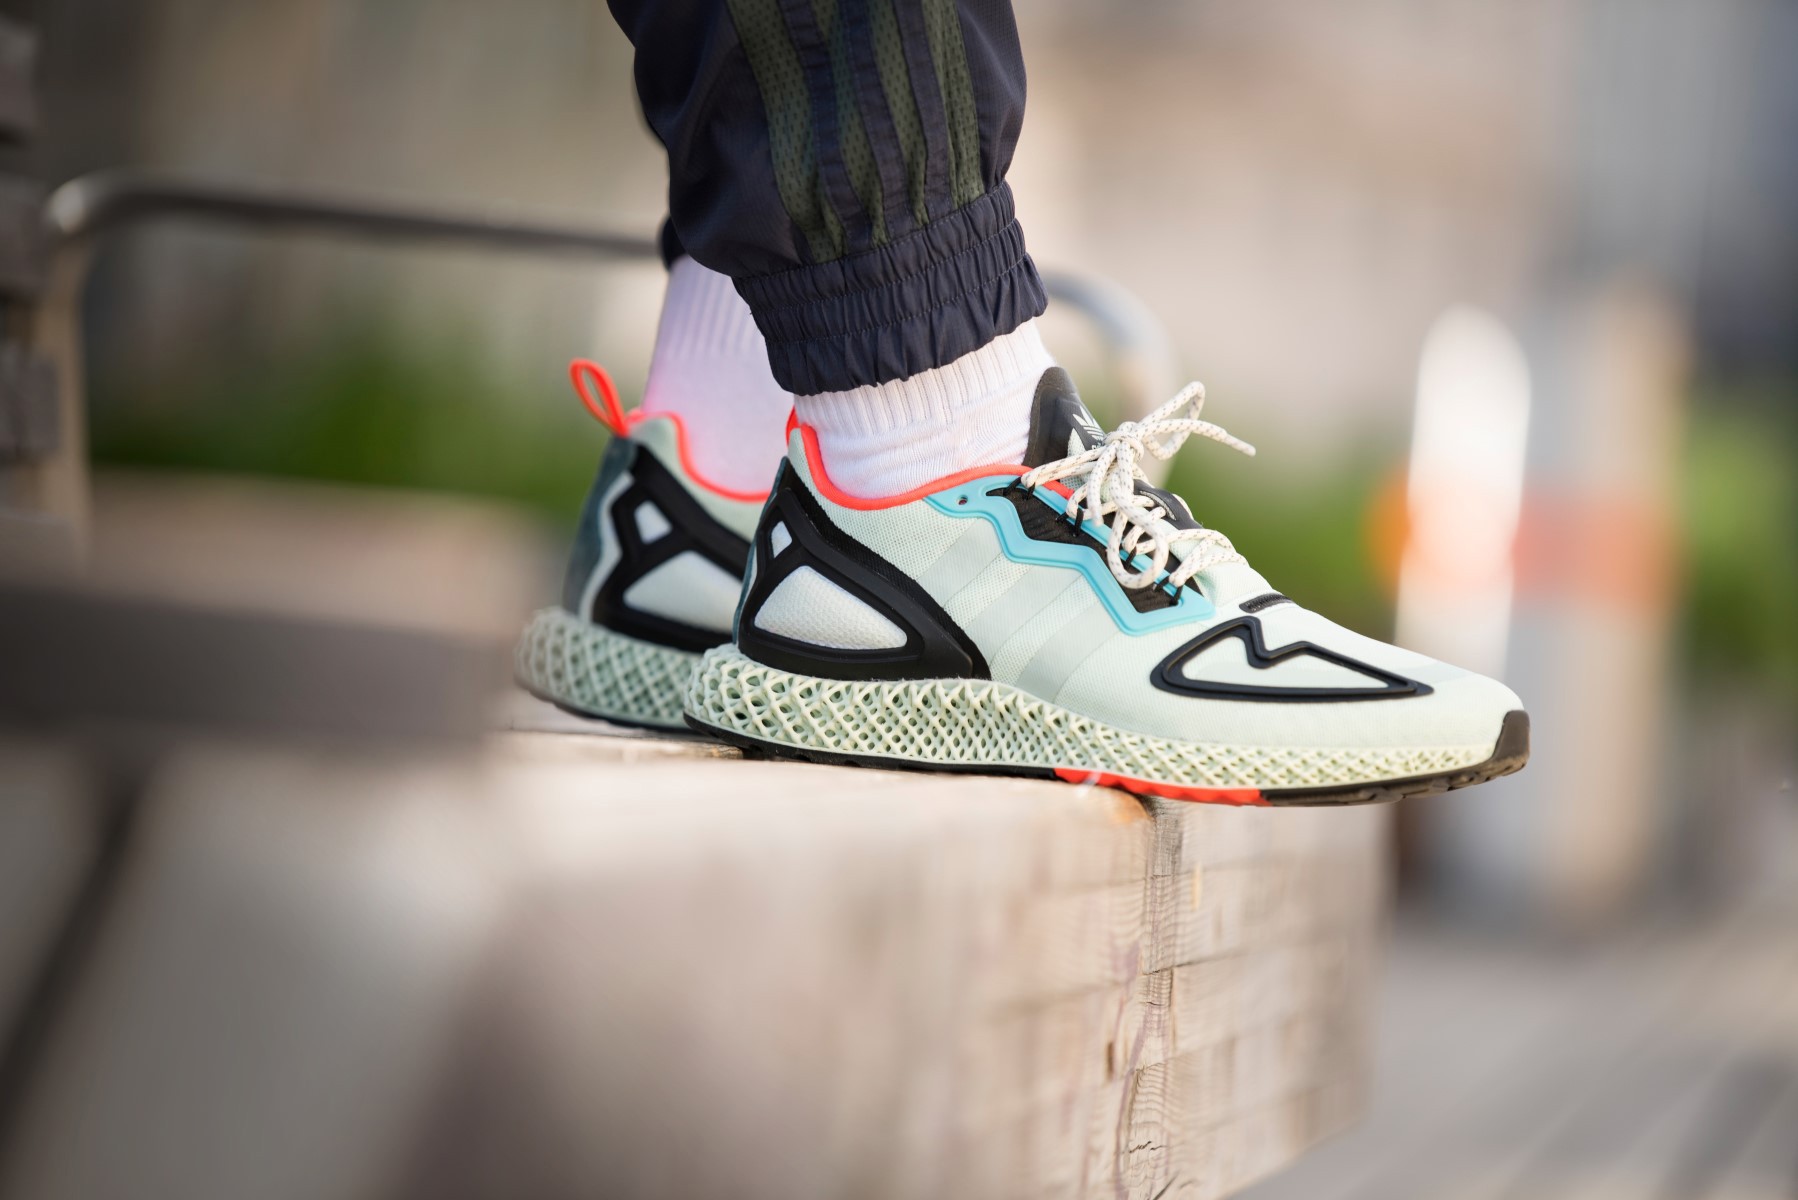 adidas zx 4d review